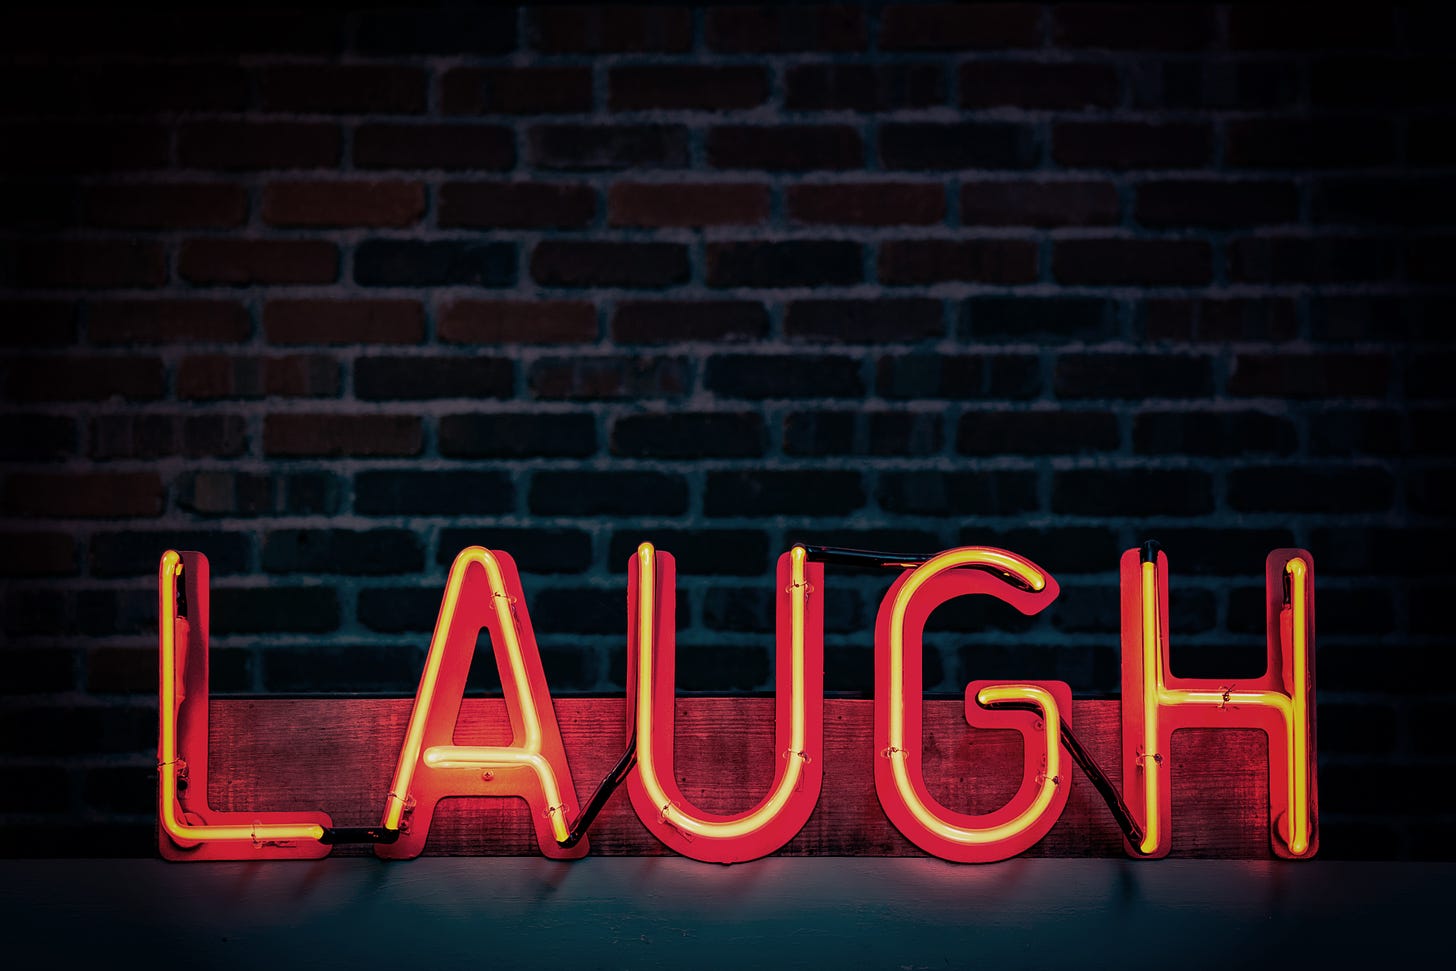 A red neon sign reads "laugh" against a dimly lit red, brick wall